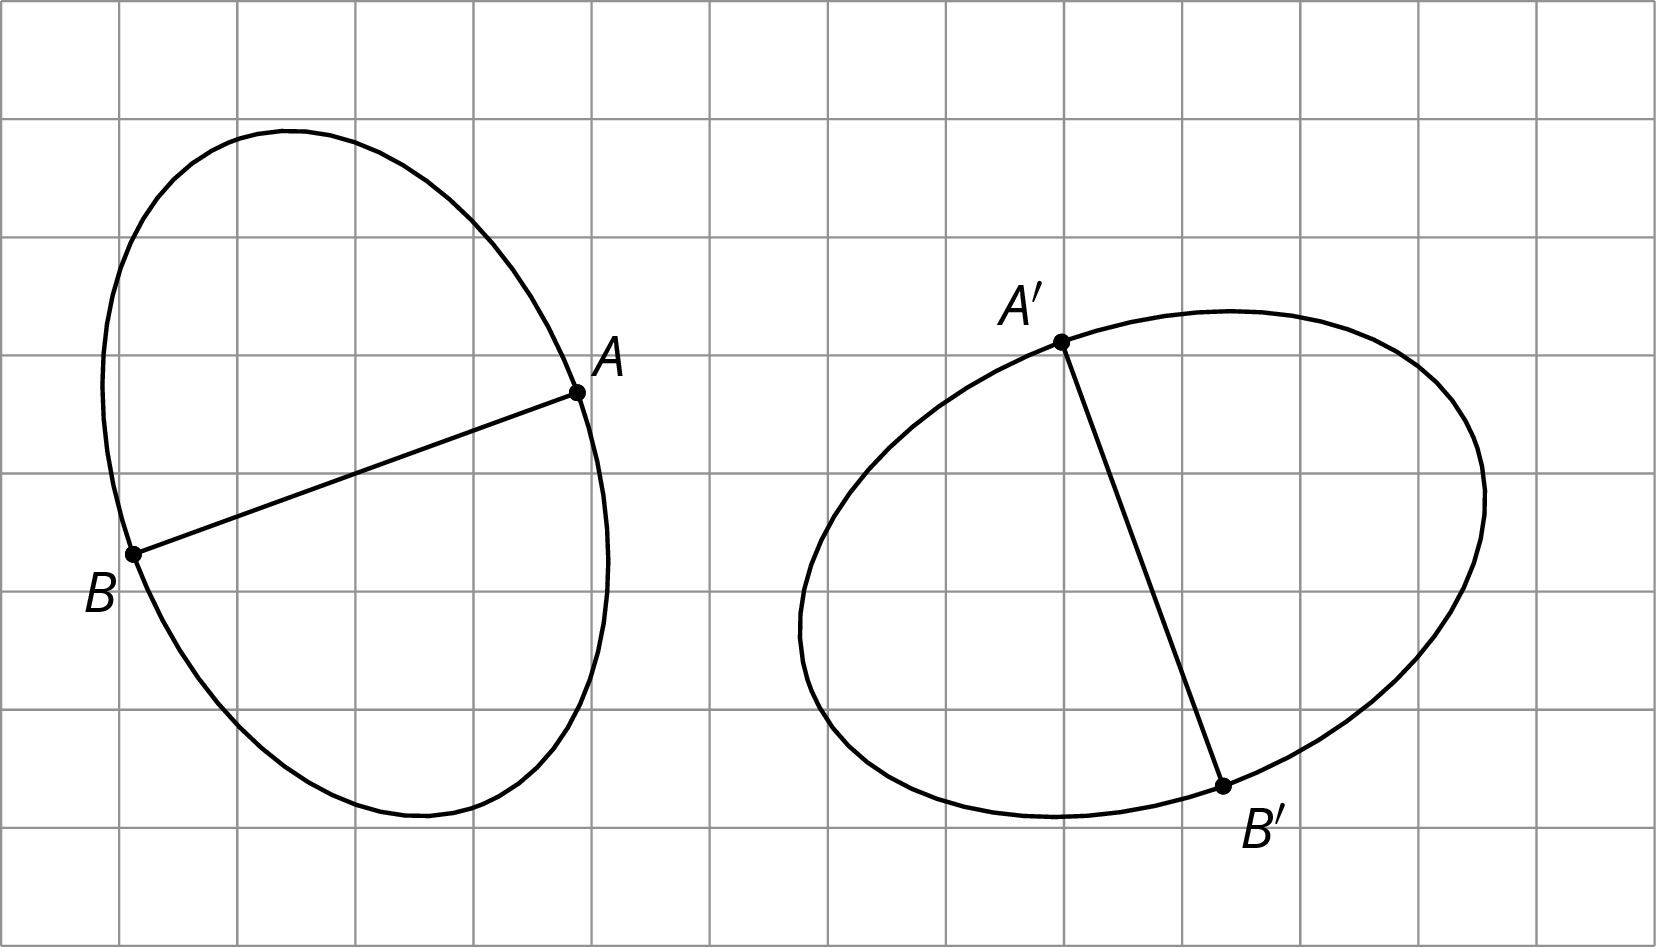 Two congruent ovals on a square grid. In the first oval, two points on opposite sides of the oval are labeled A and B and are connected by a line segment. In the second oval, two points on opposite sides of the oval are labeled A prime and B prime and are connected by a line segment.